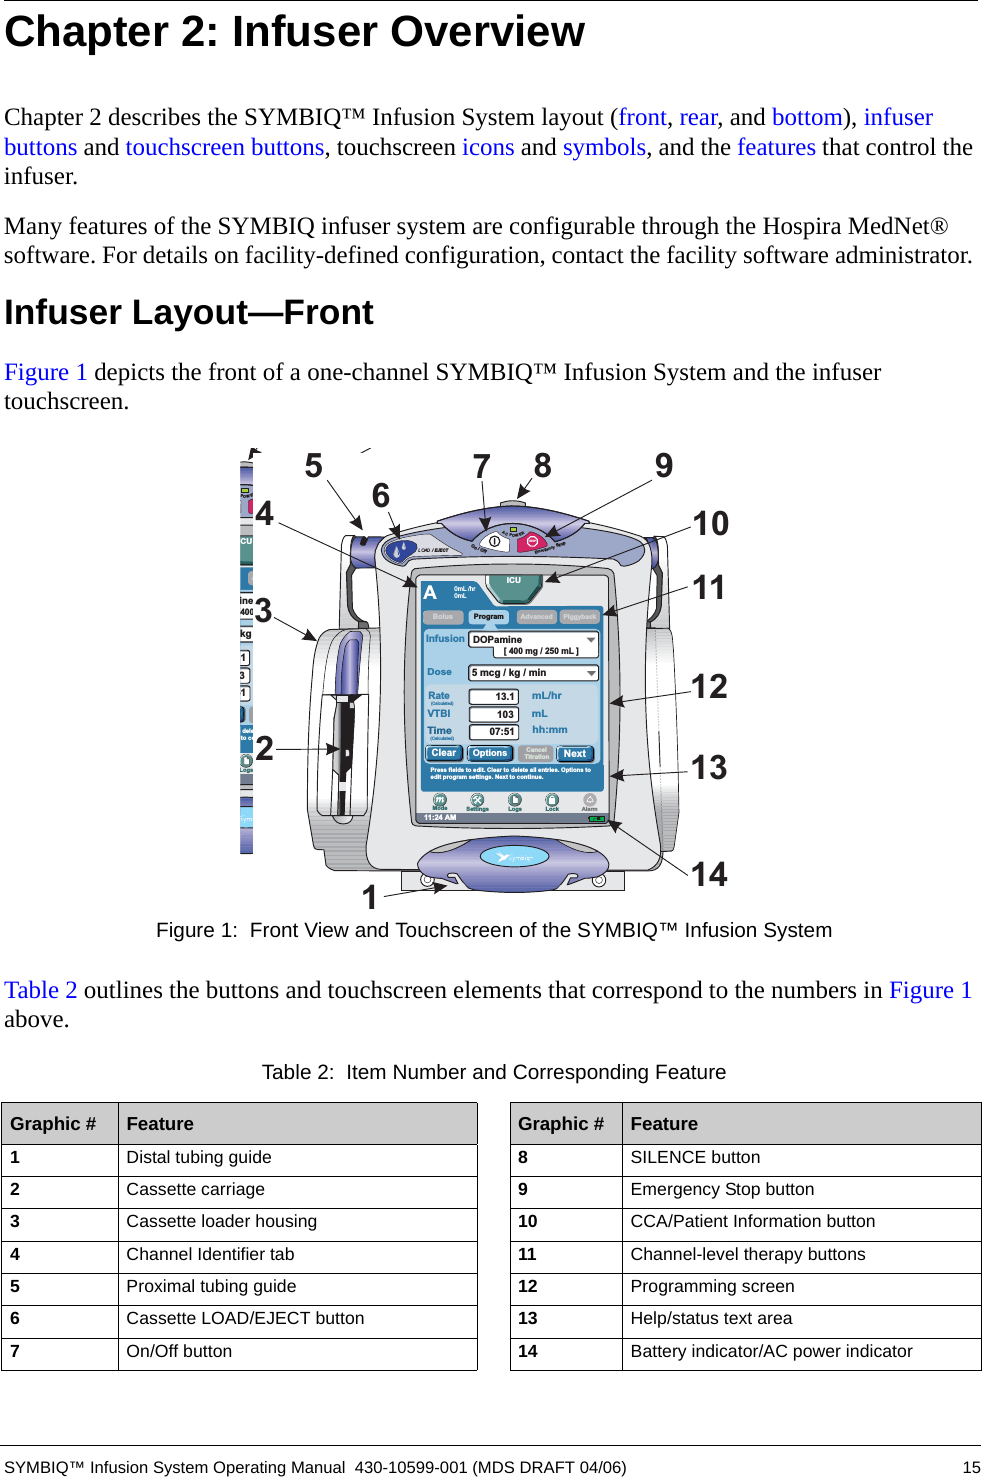  SYMBIQ™ Infusion System Operating Manual  430-10599-001 (MDS DRAFT 04/06) 15Chapter 2: Infuser Overview Chapter 2 describes the SYMBIQ™ Infusion System layout (front, rear, and bottom), infuser buttons and touchscreen buttons, touchscreen icons and symbols, and the features that control the infuser.Many features of the SYMBIQ infuser system are configurable through the Hospira MedNet® software. For details on facility-defined configuration, contact the facility software administrator. Infuser Layout—FrontFigure 1 depicts the front of a one-channel SYMBIQ™ Infusion System and the infuser touchscreen. Figure 1:  Front View and Touchscreen of the SYMBIQ™ Infusion SystemTable 2 outlines the buttons and touchscreen elements that correspond to the numbers in Figure 1 above. Table 2:  Item Number and Corresponding FeatureGraphic # Feature Graphic # Feature1Distal tubing guide 8SILENCE button2Cassette carriage 9Emergency Stop button3Cassette loader housing 10 CCA/Patient Information button4Channel Identifier tab 11 Channel-level therapy buttons5Proximal tubing guide 12 Programming screen6Cassette LOAD/EJECT button 13 Help/status text area7On/Off button 14 Battery indicator/AC power indicator1011121314STOPPOWEREmergencyStopodelete all entries. Options toto continue.Advancedkg / min1351mL/hrmLhh:mmineCULogs LockAlarm400 mg / 250 mL ]PiggybackNextCancelTitration7610411121314239518LOAD / EJECTSTOPACPOWEREmergencyStopOn/Off11:24 AMPress fields to edit. Clear to delete all entries. Options toedit program settings. Next to continue.AProgramRate(Calculated)DoseAdvancedInfusion5mcg/kg/min13.110307:51VTBITime(Calculated)mL/hrmLhh:mmDOPamineICUSettings Logs LockModeOptionsClearAlarm[ 400 mg / 250 mL ]PiggybackBolusNextCancelTitration0mL /hr0mL